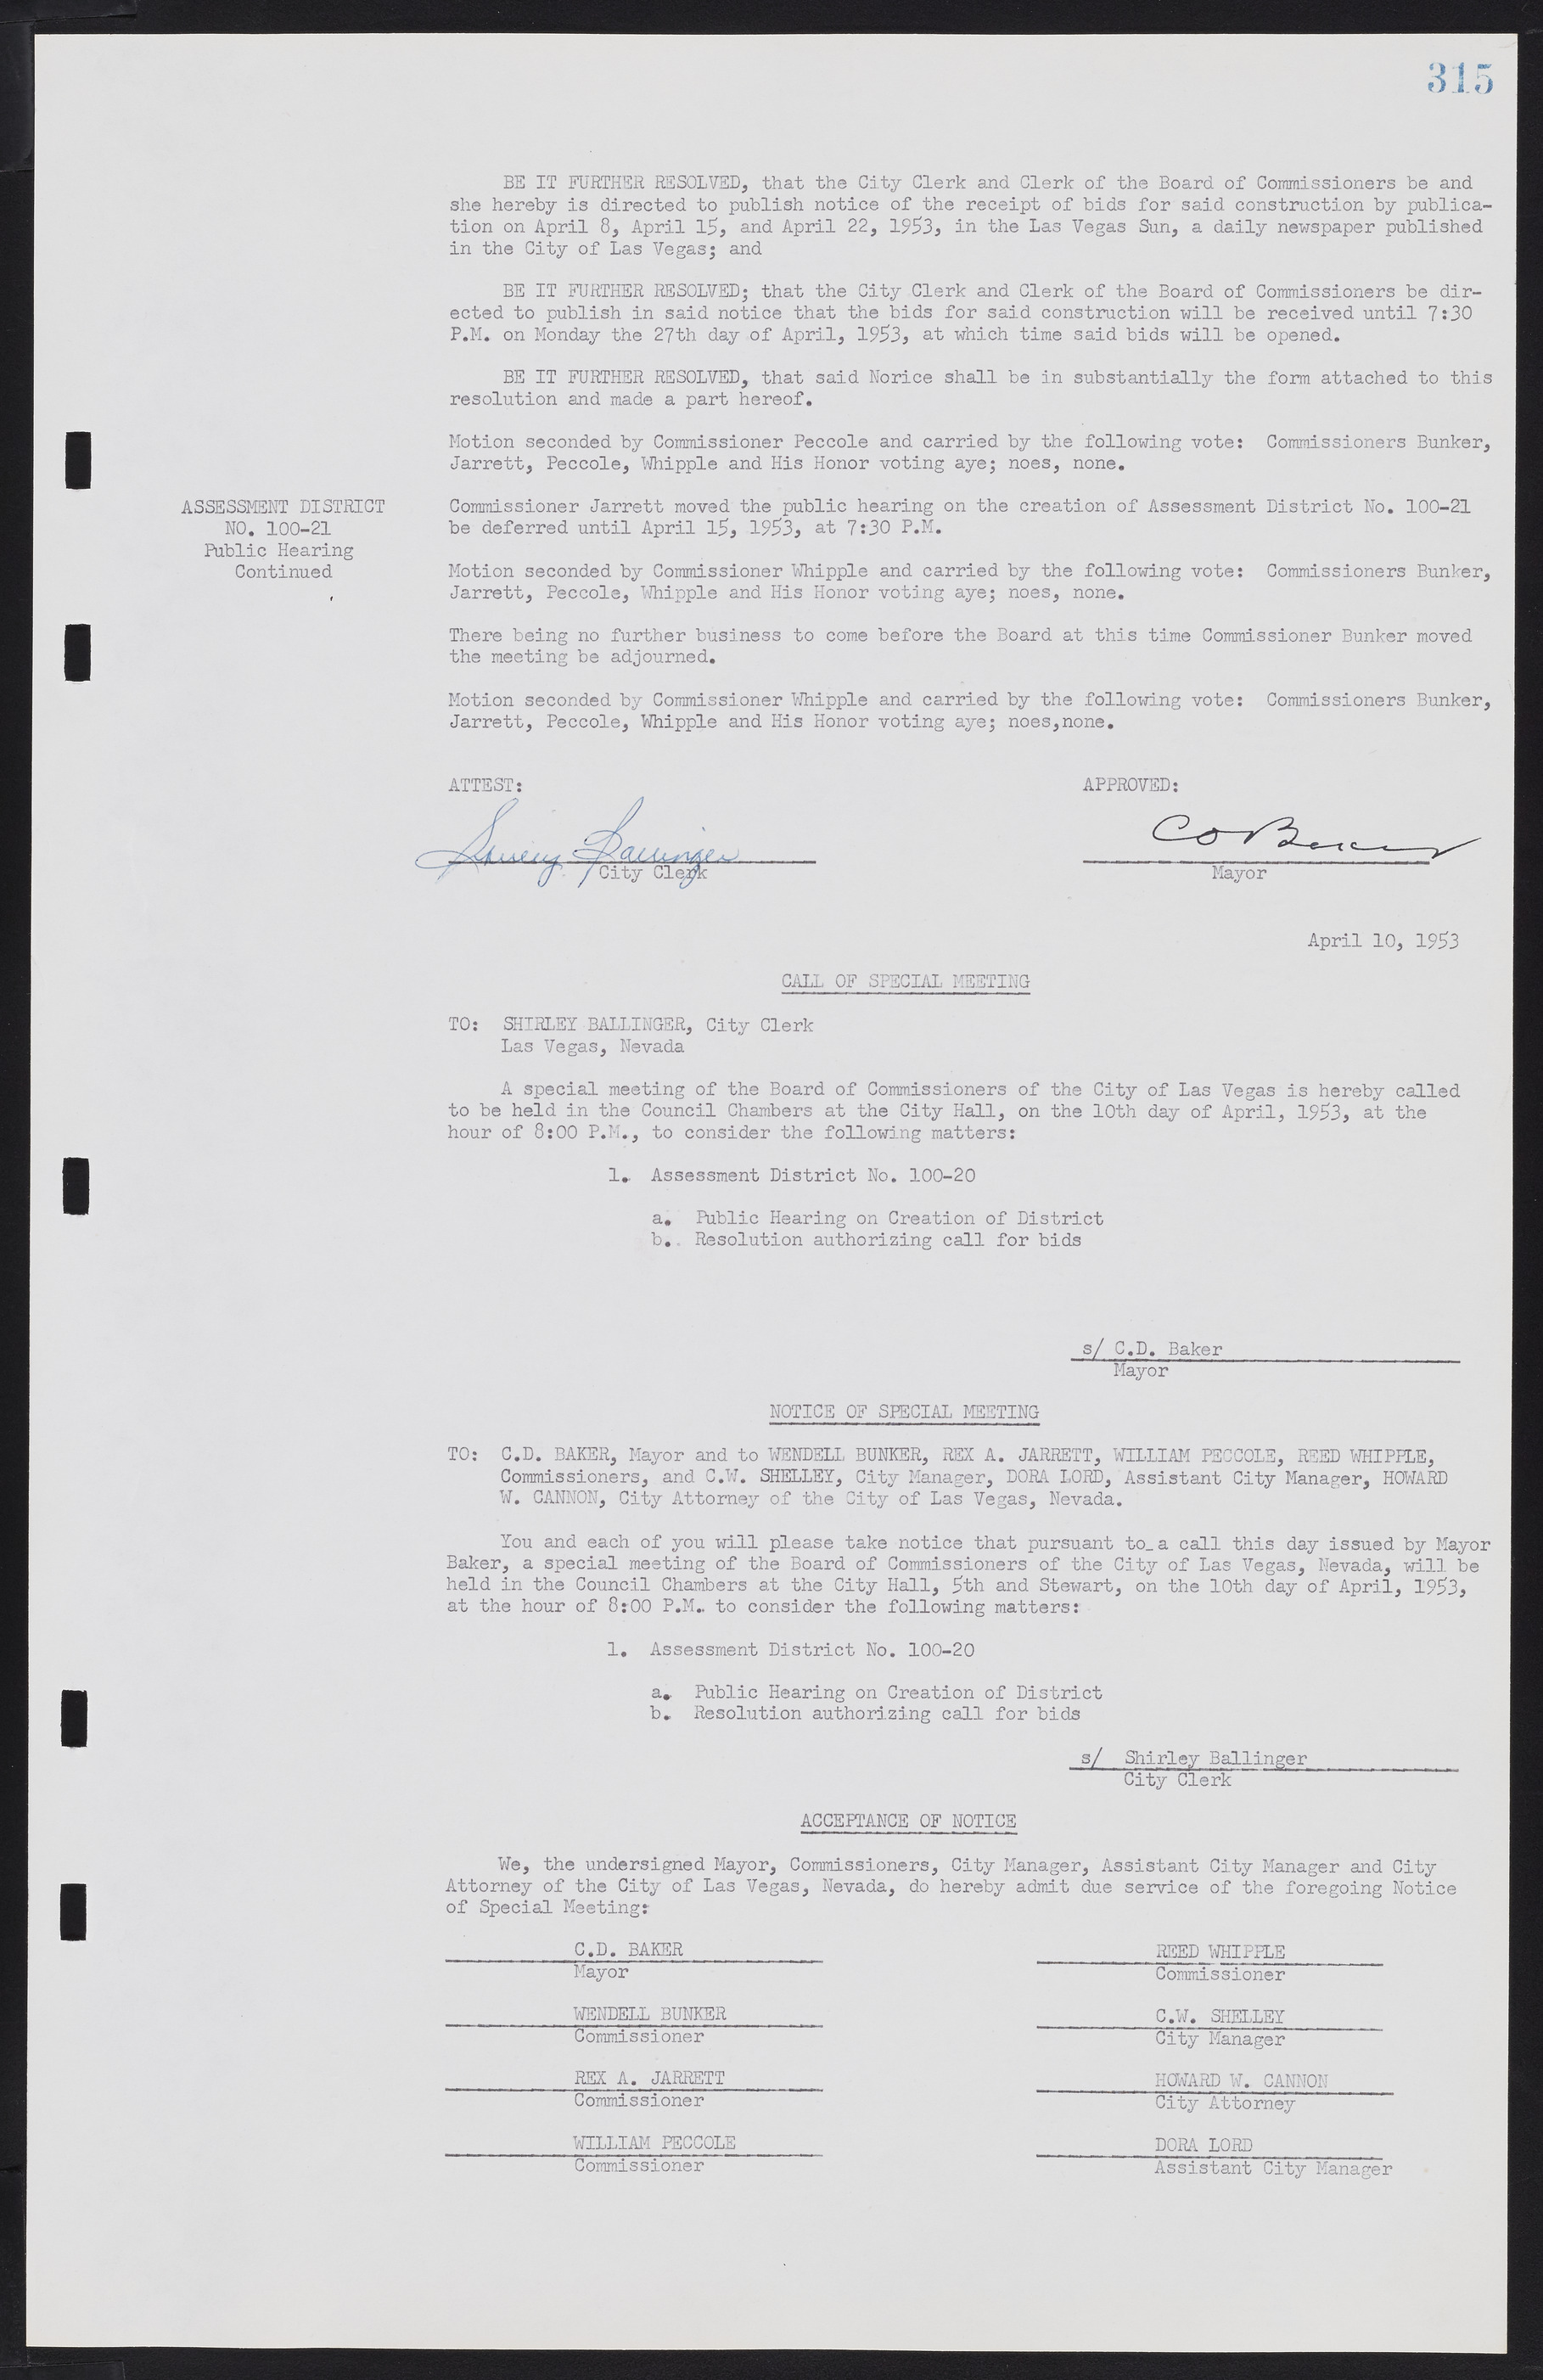 Las Vegas City Commission Minutes, May 26, 1952 to February 17, 1954, lvc000008-343